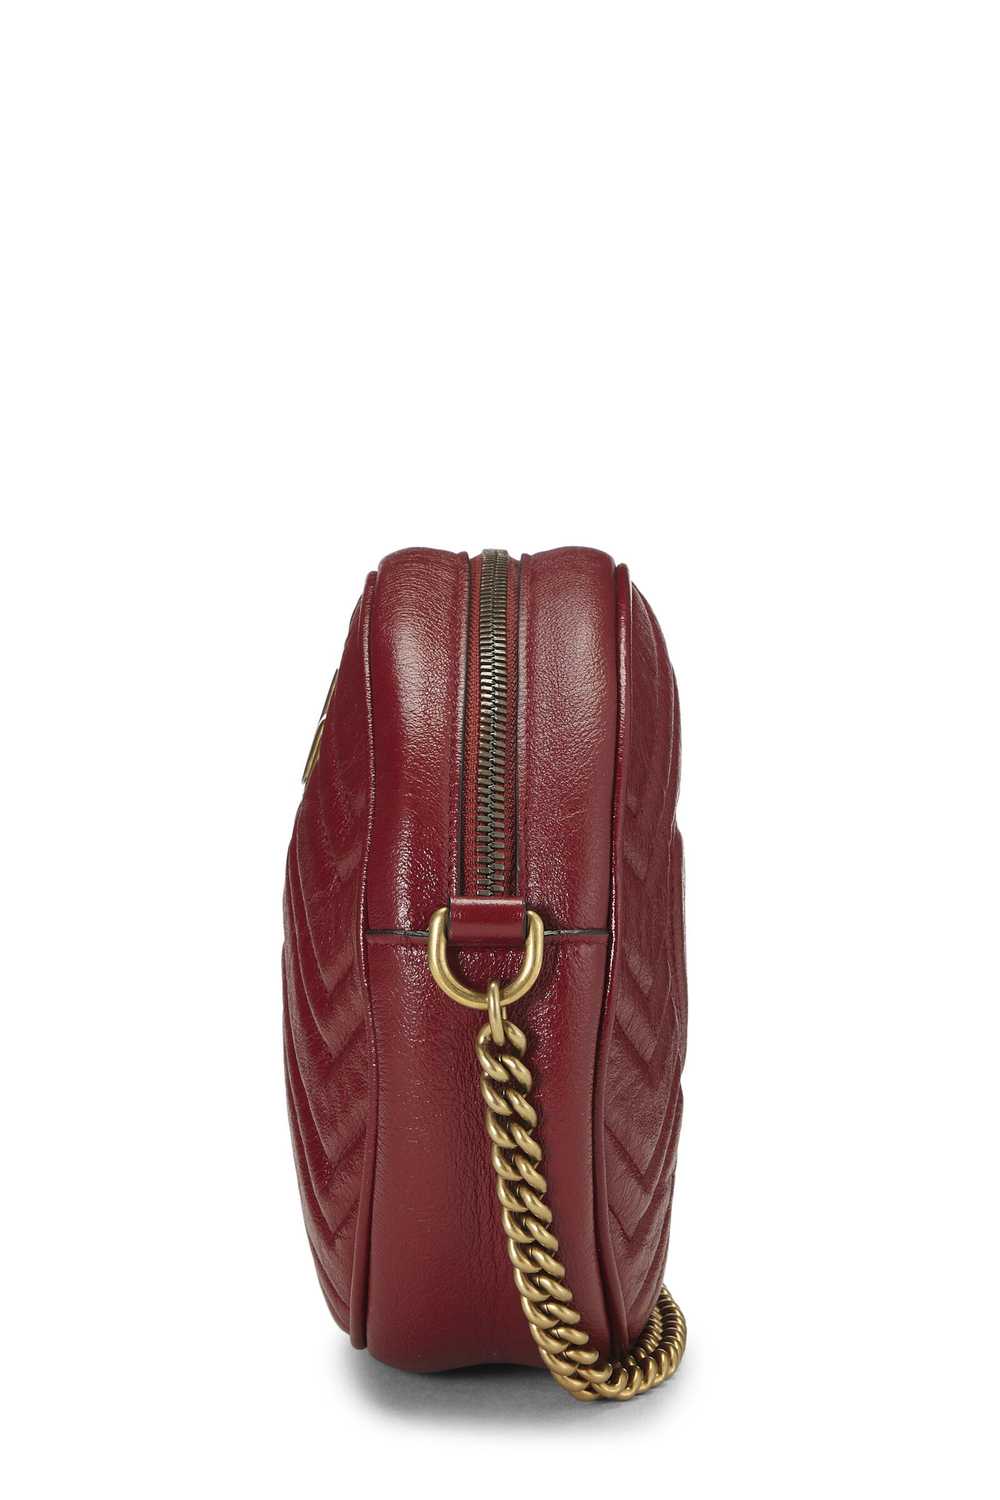 Red Leather GG Marmont Round Shoulder Bag Mini - image 3